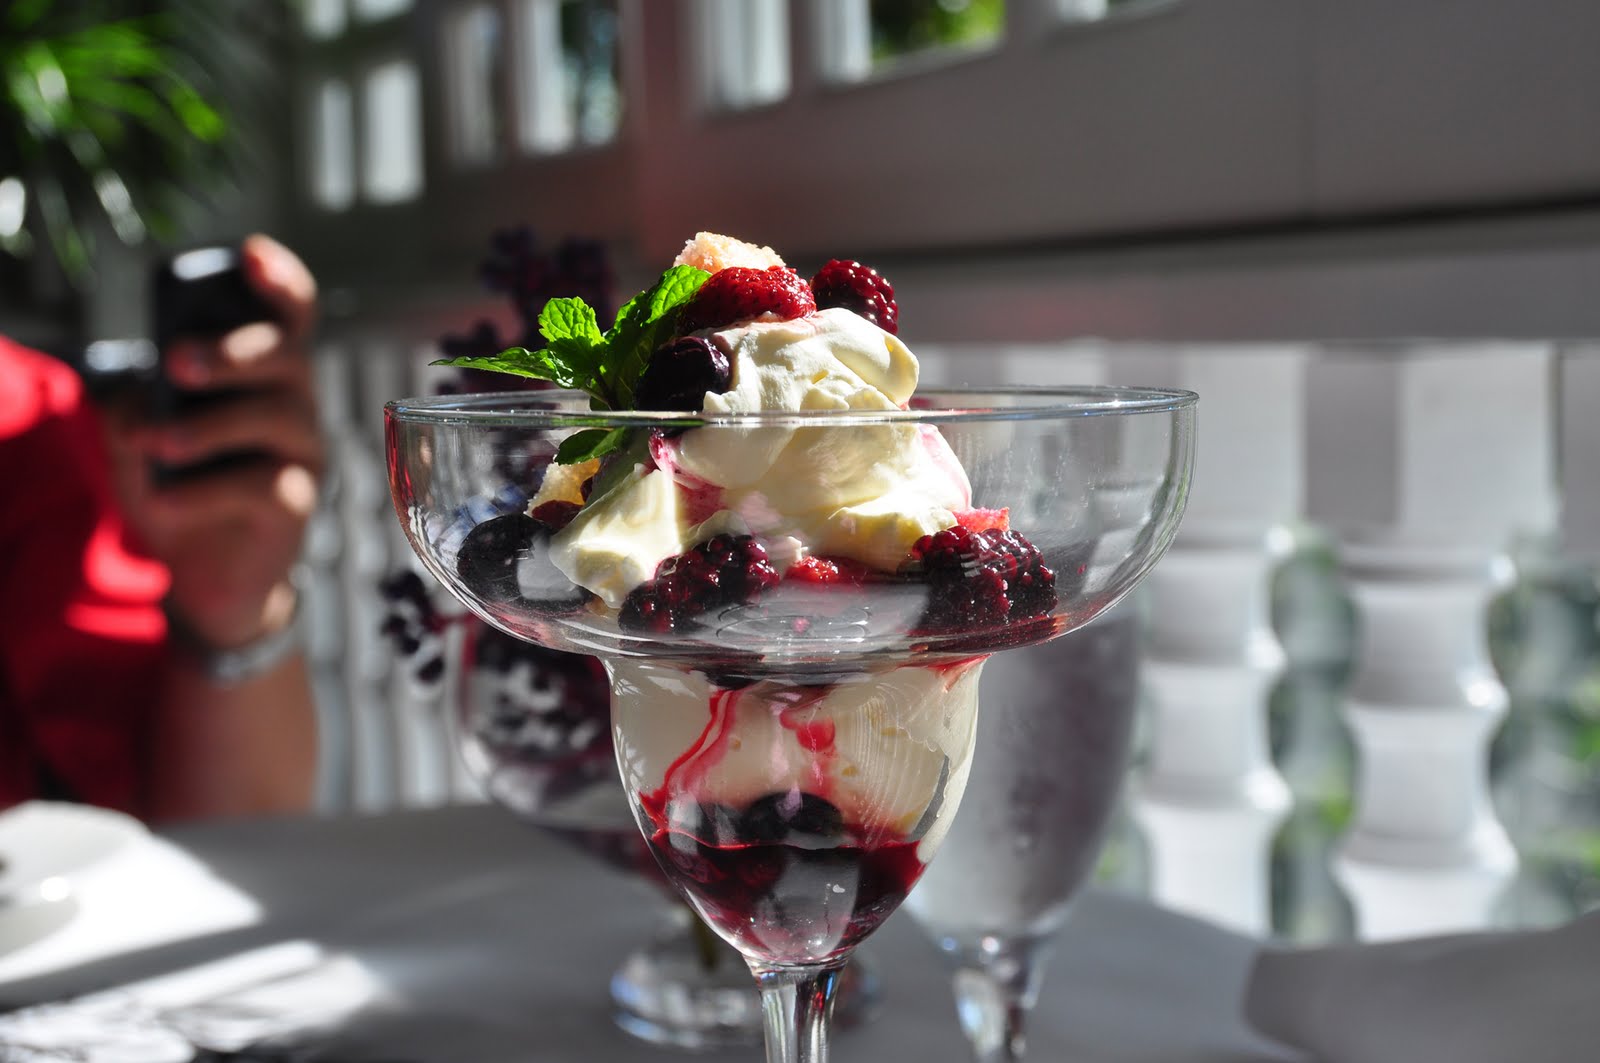 [Mixed+Berries+with+Chantilly+Cream.jpg]